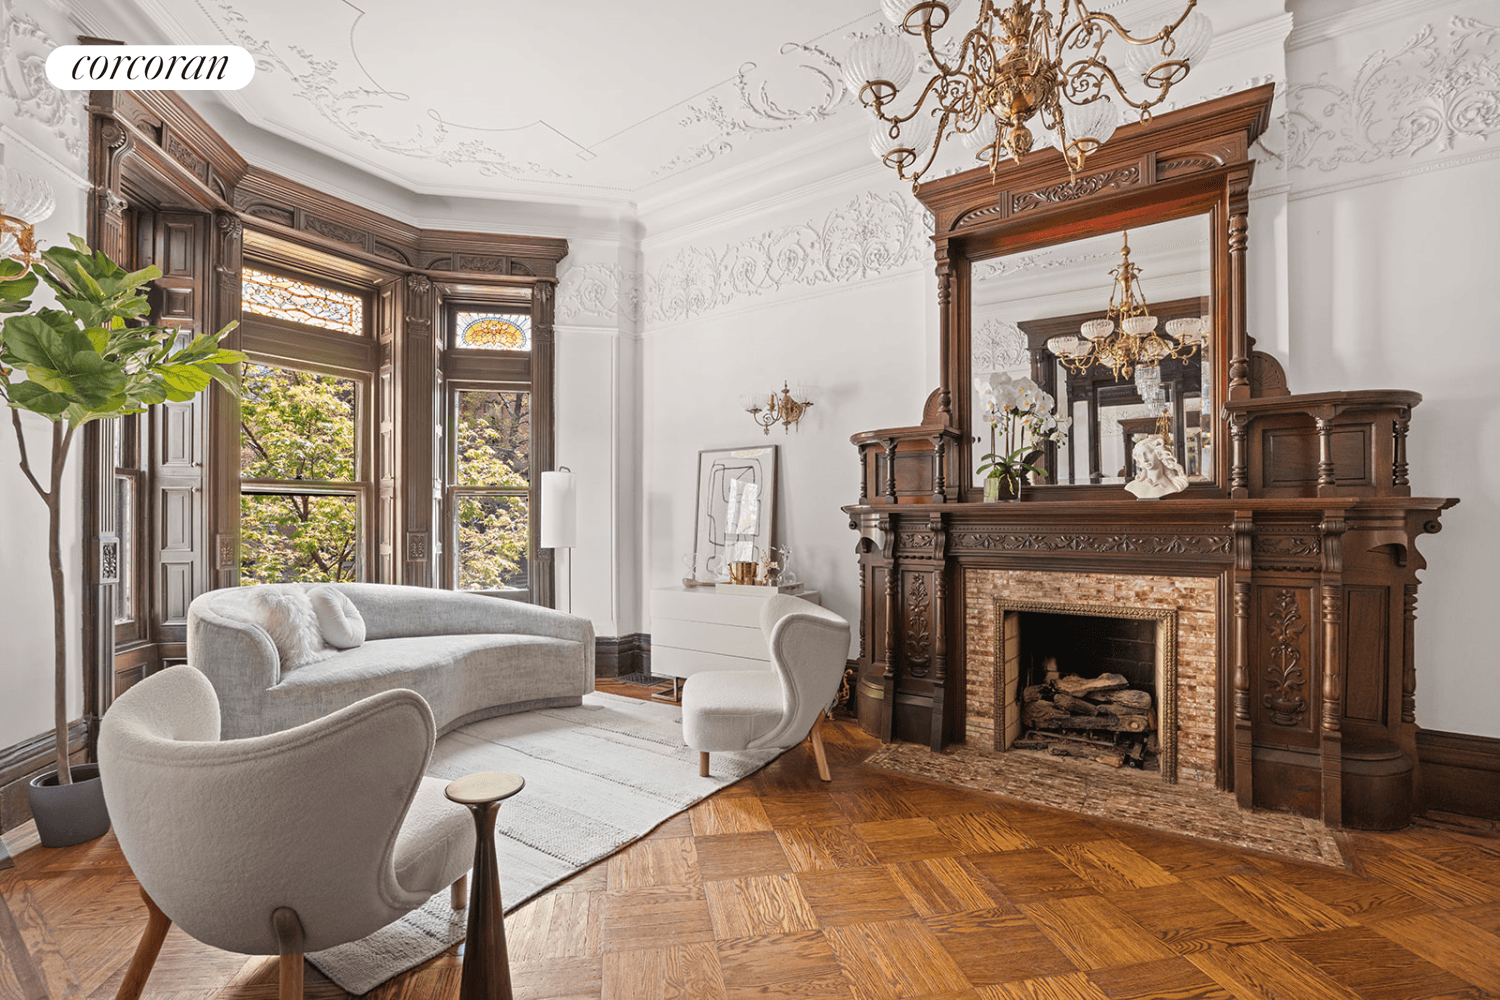 Relish the historic elegance of this meticulously restored, with all new mechanicals, 5 story townhouse in prime Park Slope brimming with charm and original details.